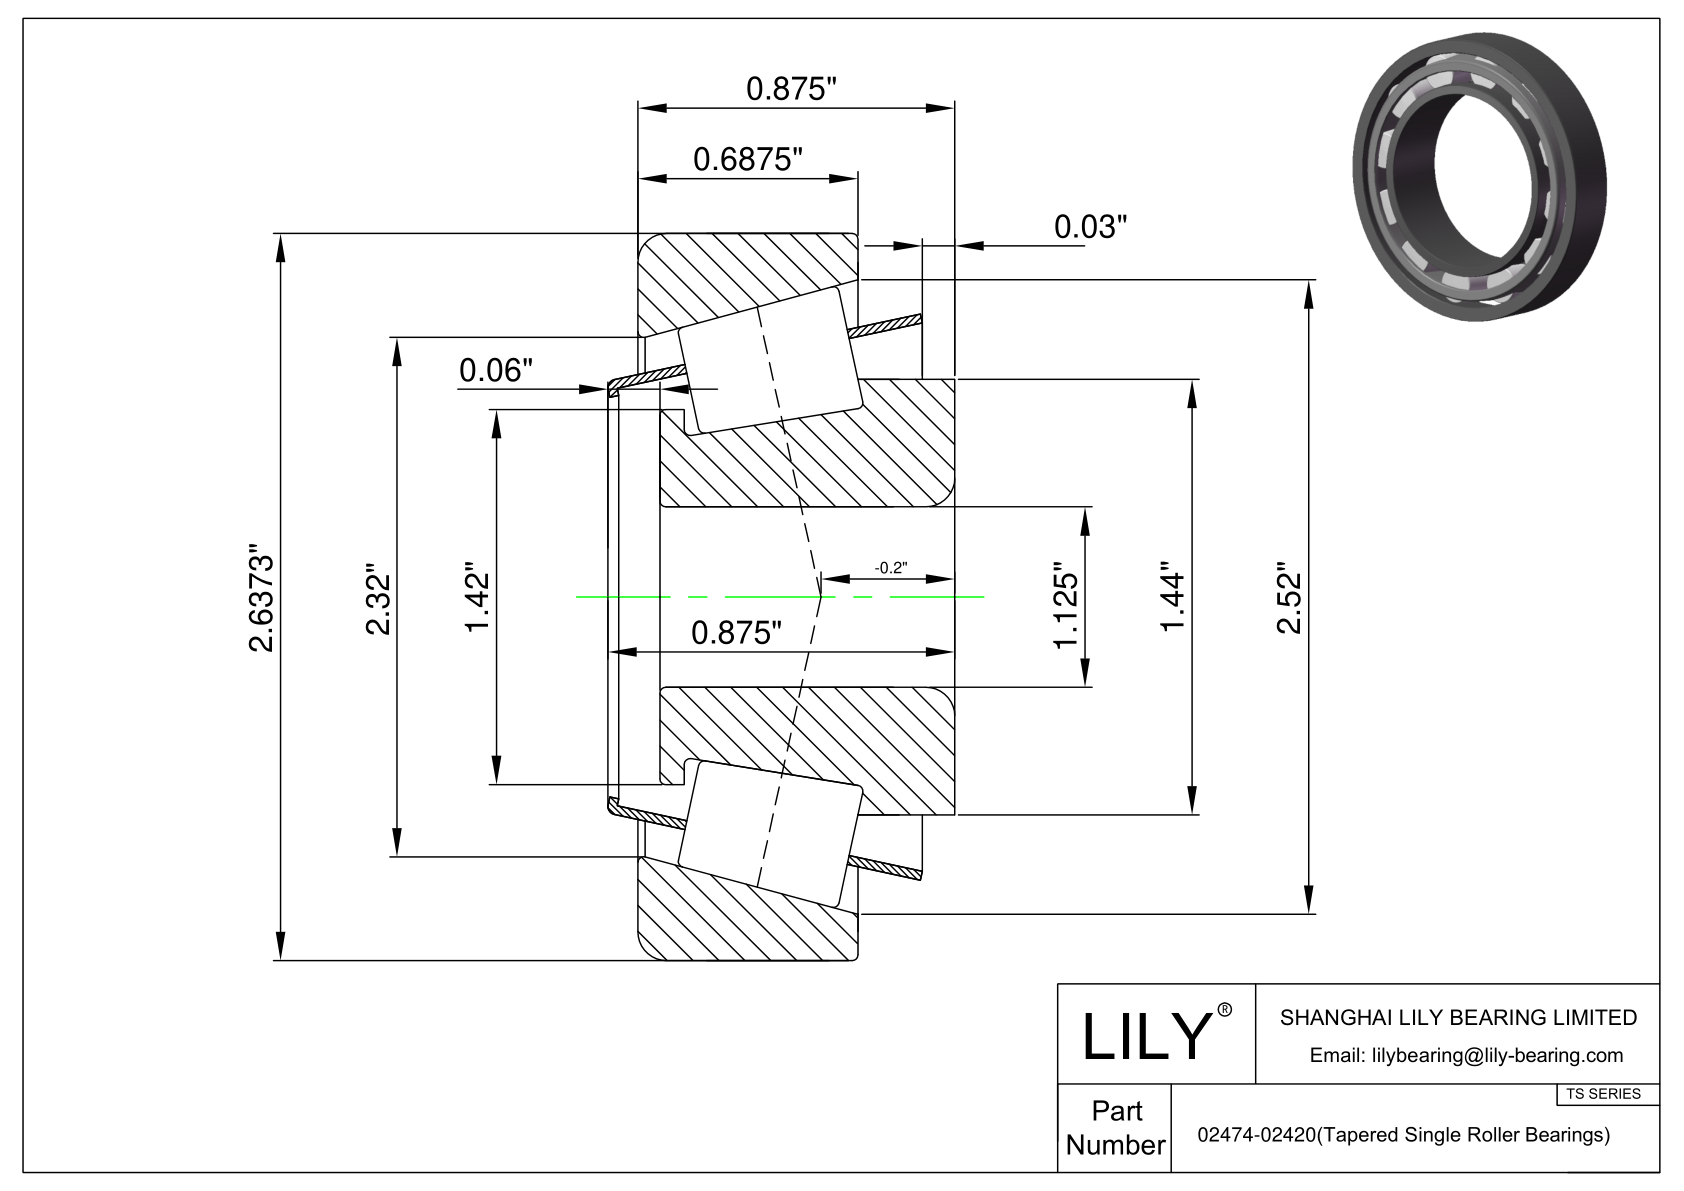 02474-02420 TS (Tapered Single Roller Bearings) (Imperial) cad drawing